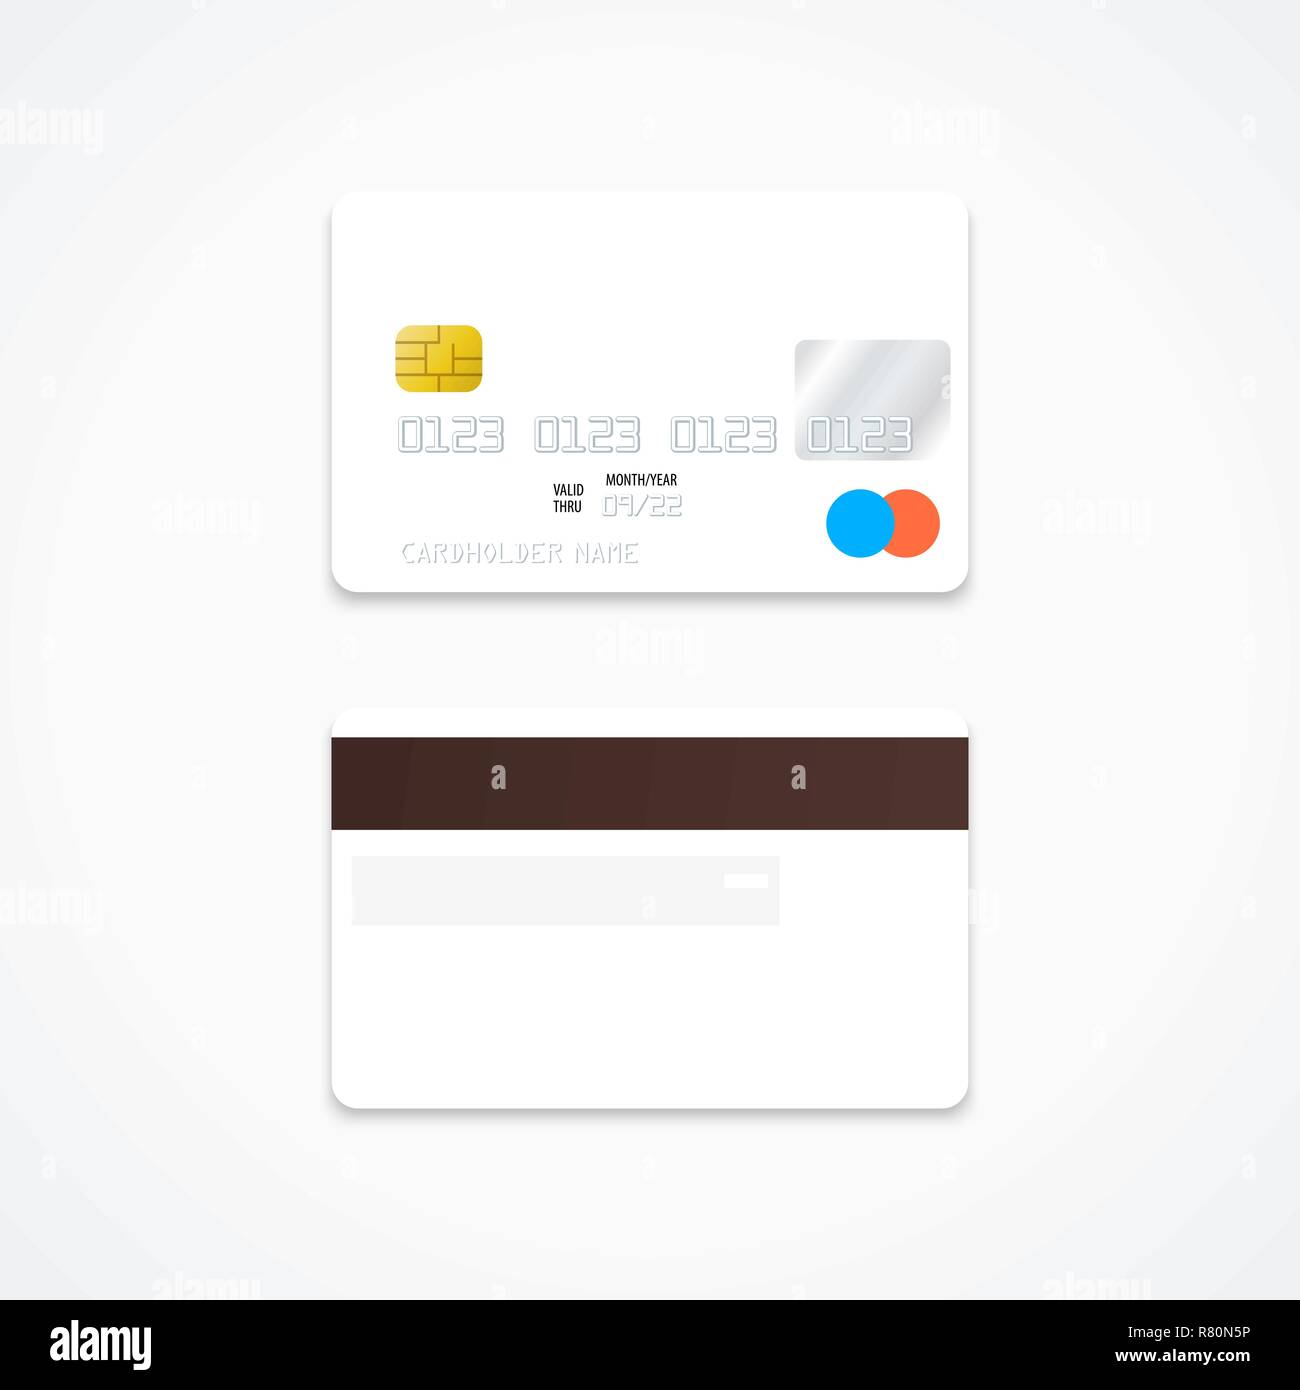 vector mock up white blank plastic bank card face and back sides illustration realistic with shadow template design isolated on light background Stock Vector